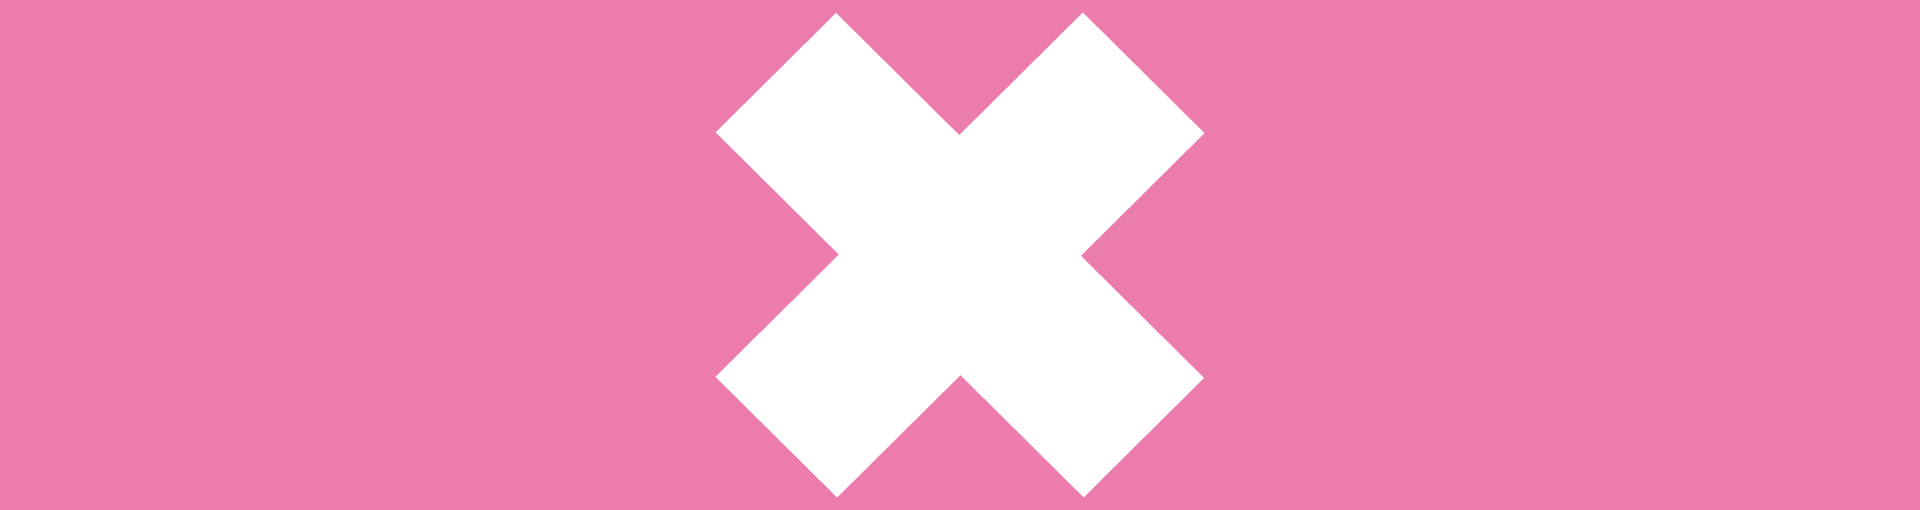 A white cross on a pink background